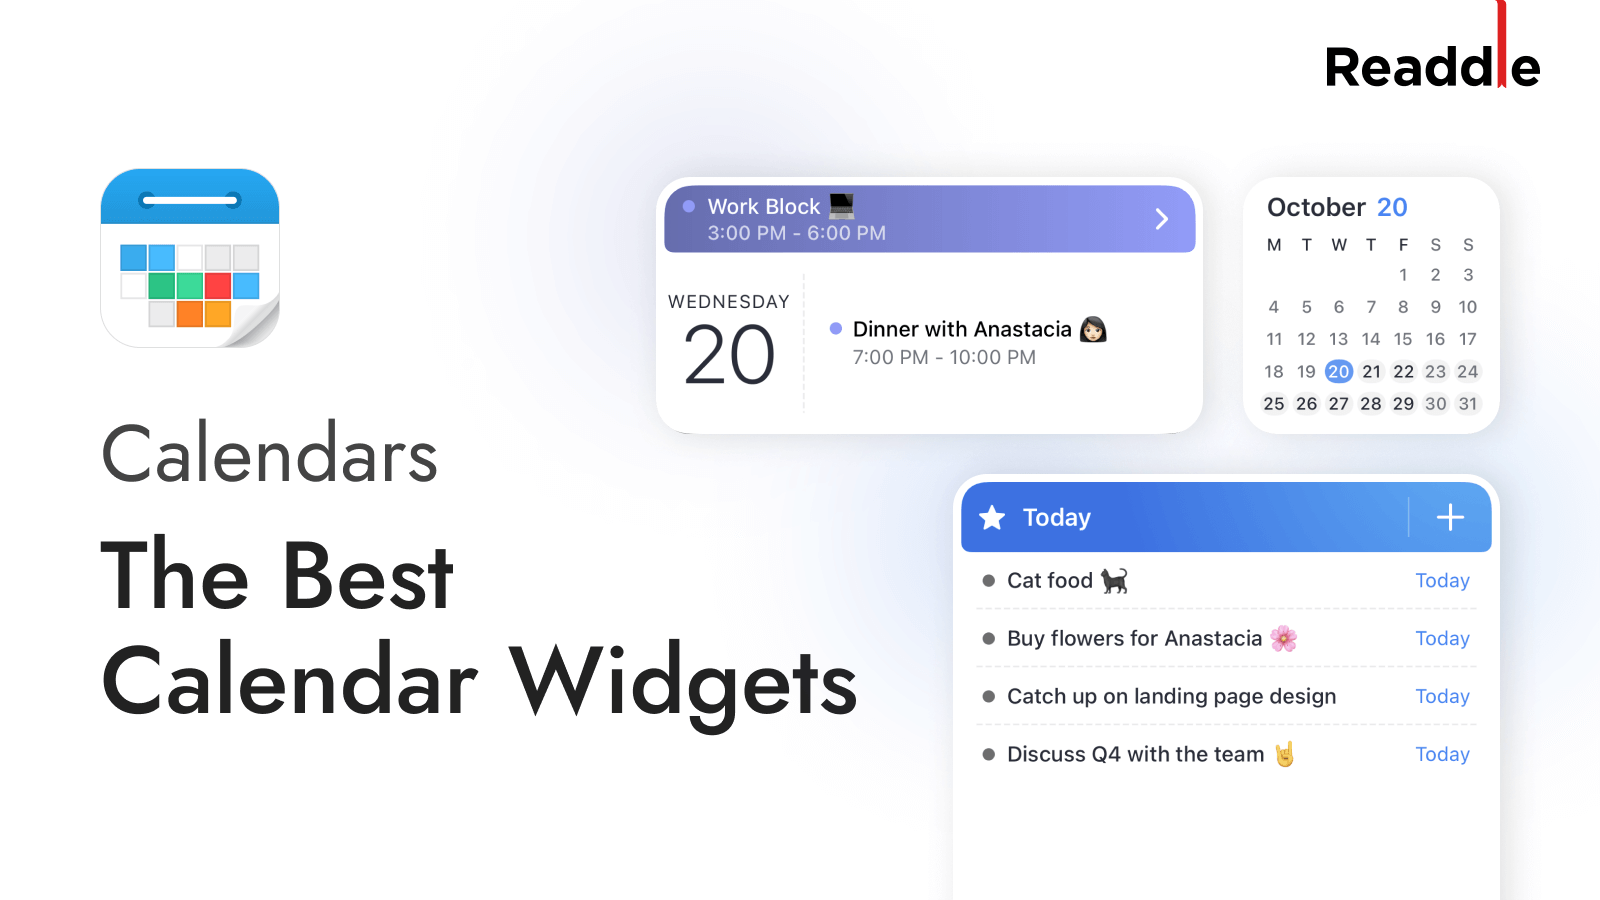 Here are Some of The Best Calendar Widgets for iPhones and iPads